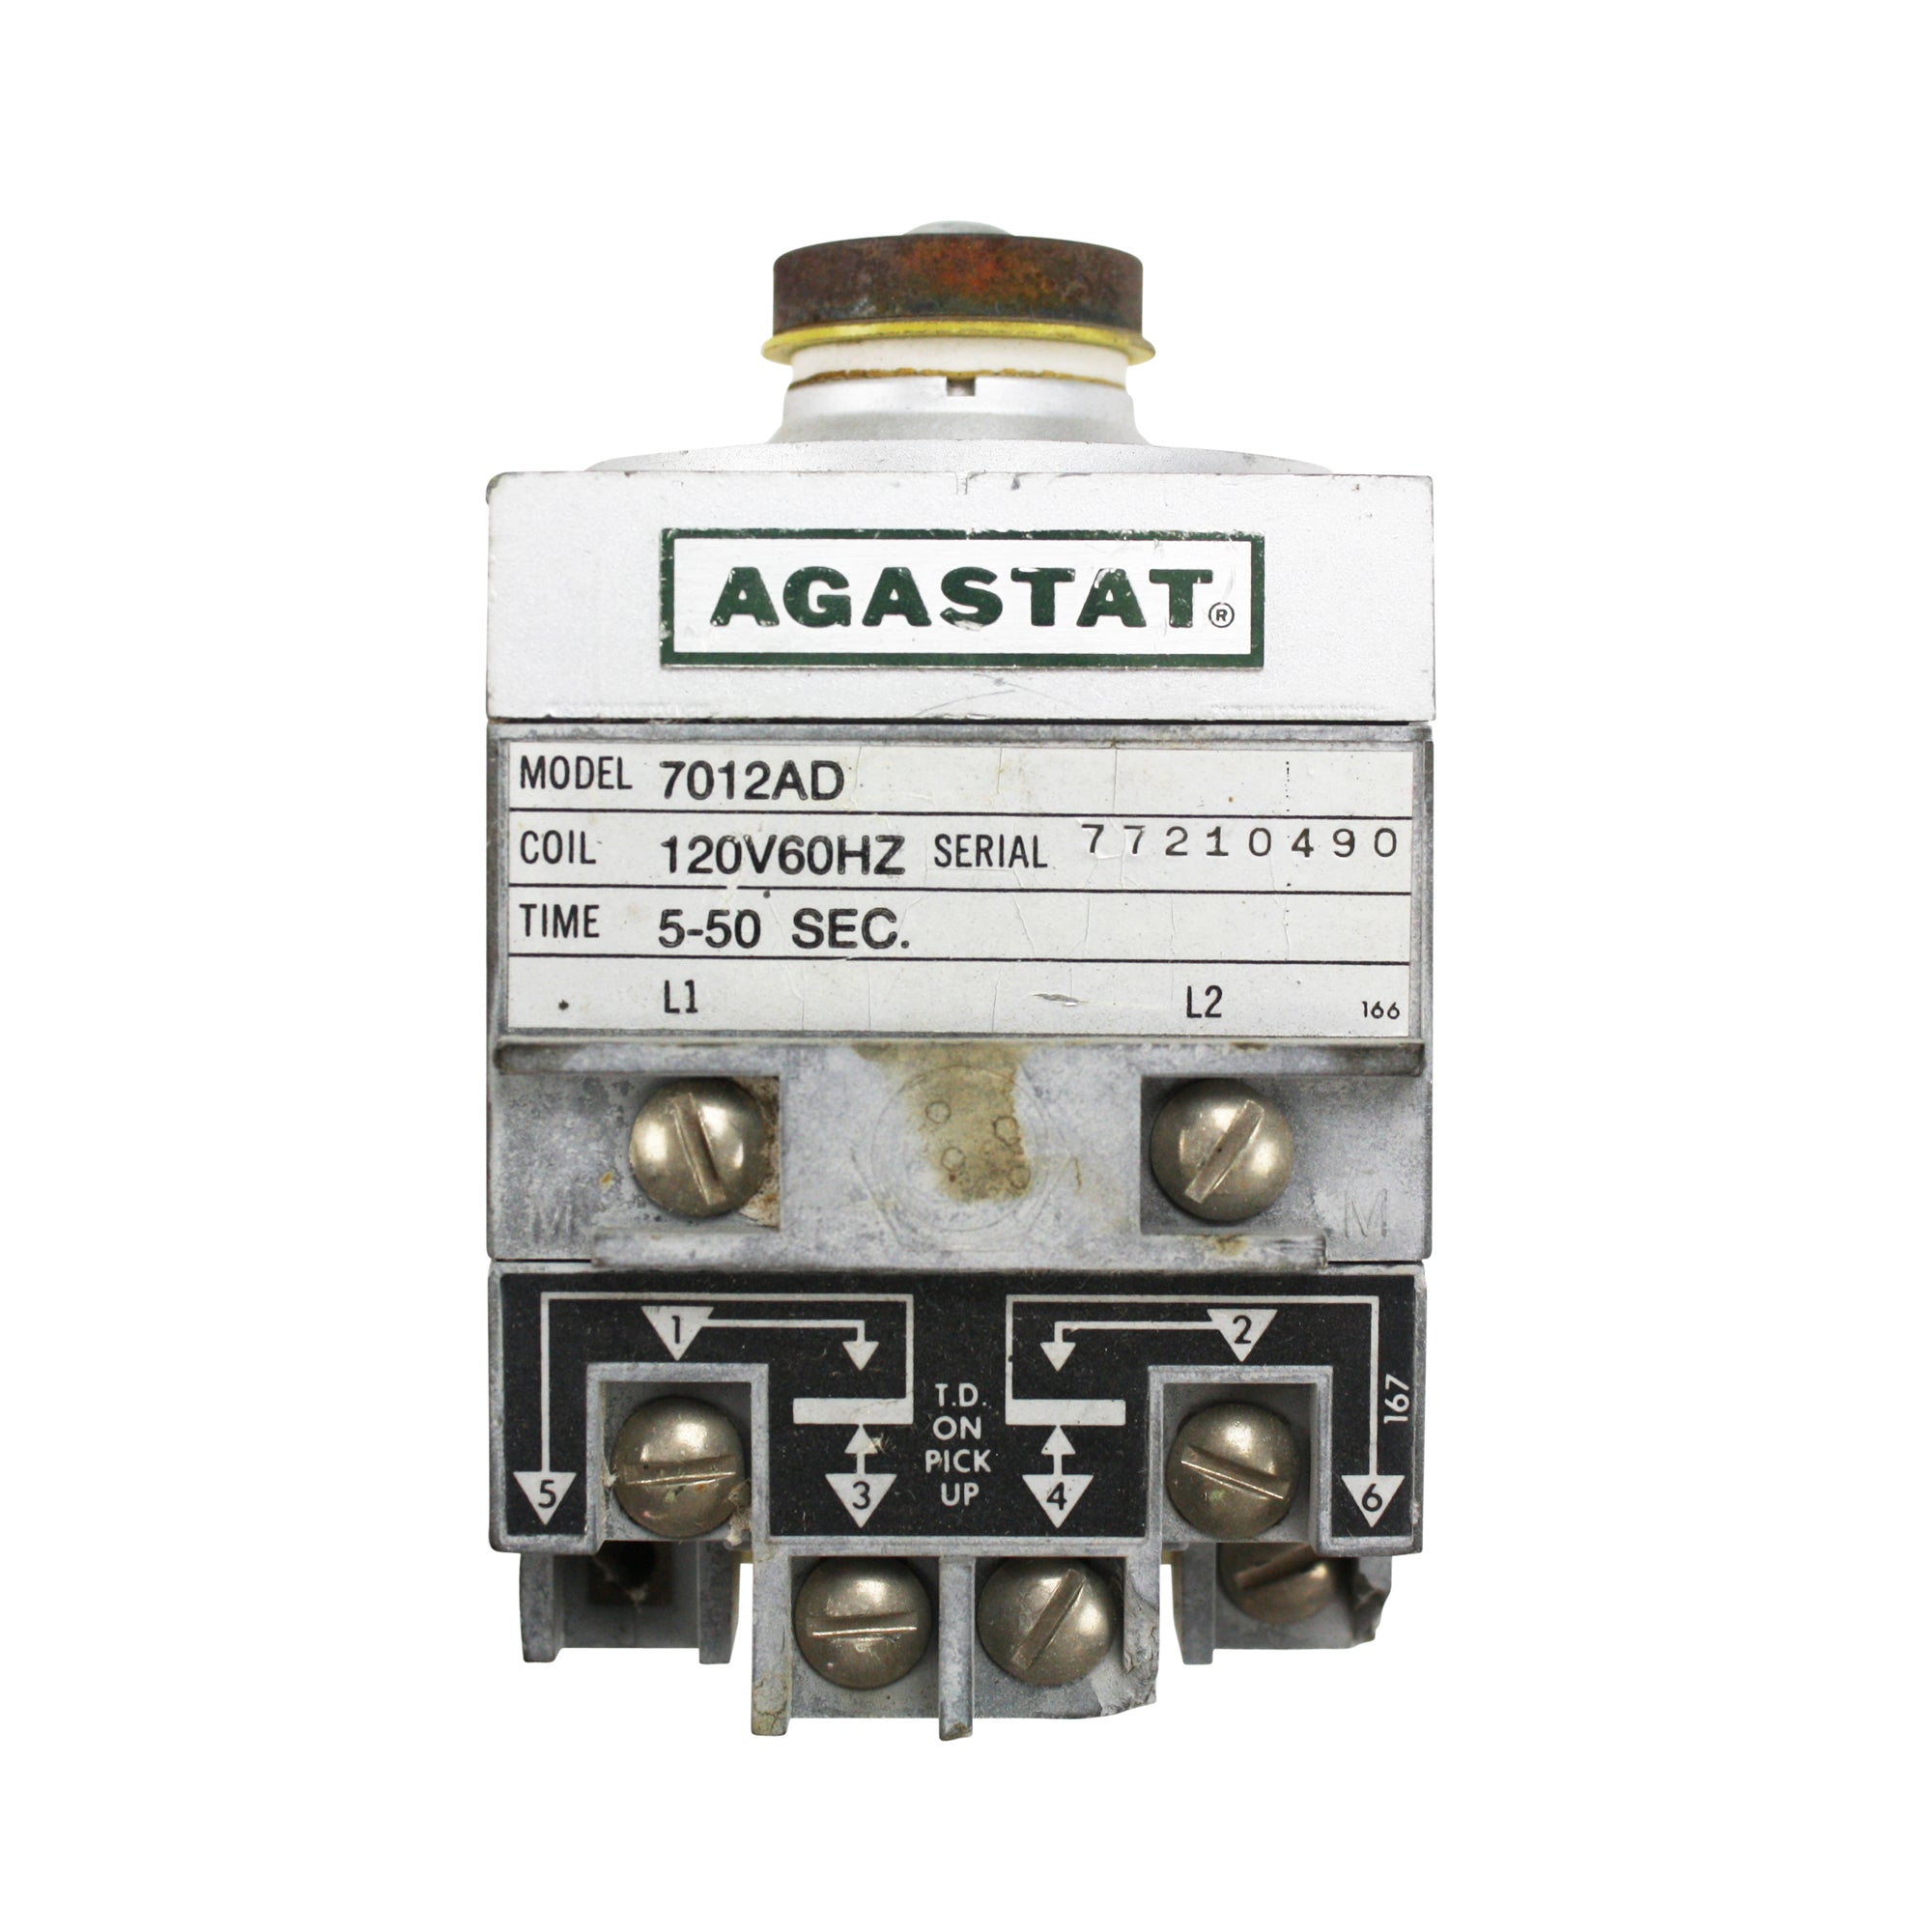 AgaStat, AGASTAT 7012AD 5-50 SECOND ELECTROPNEUMATIC TIMING TIME DELAY RELAY